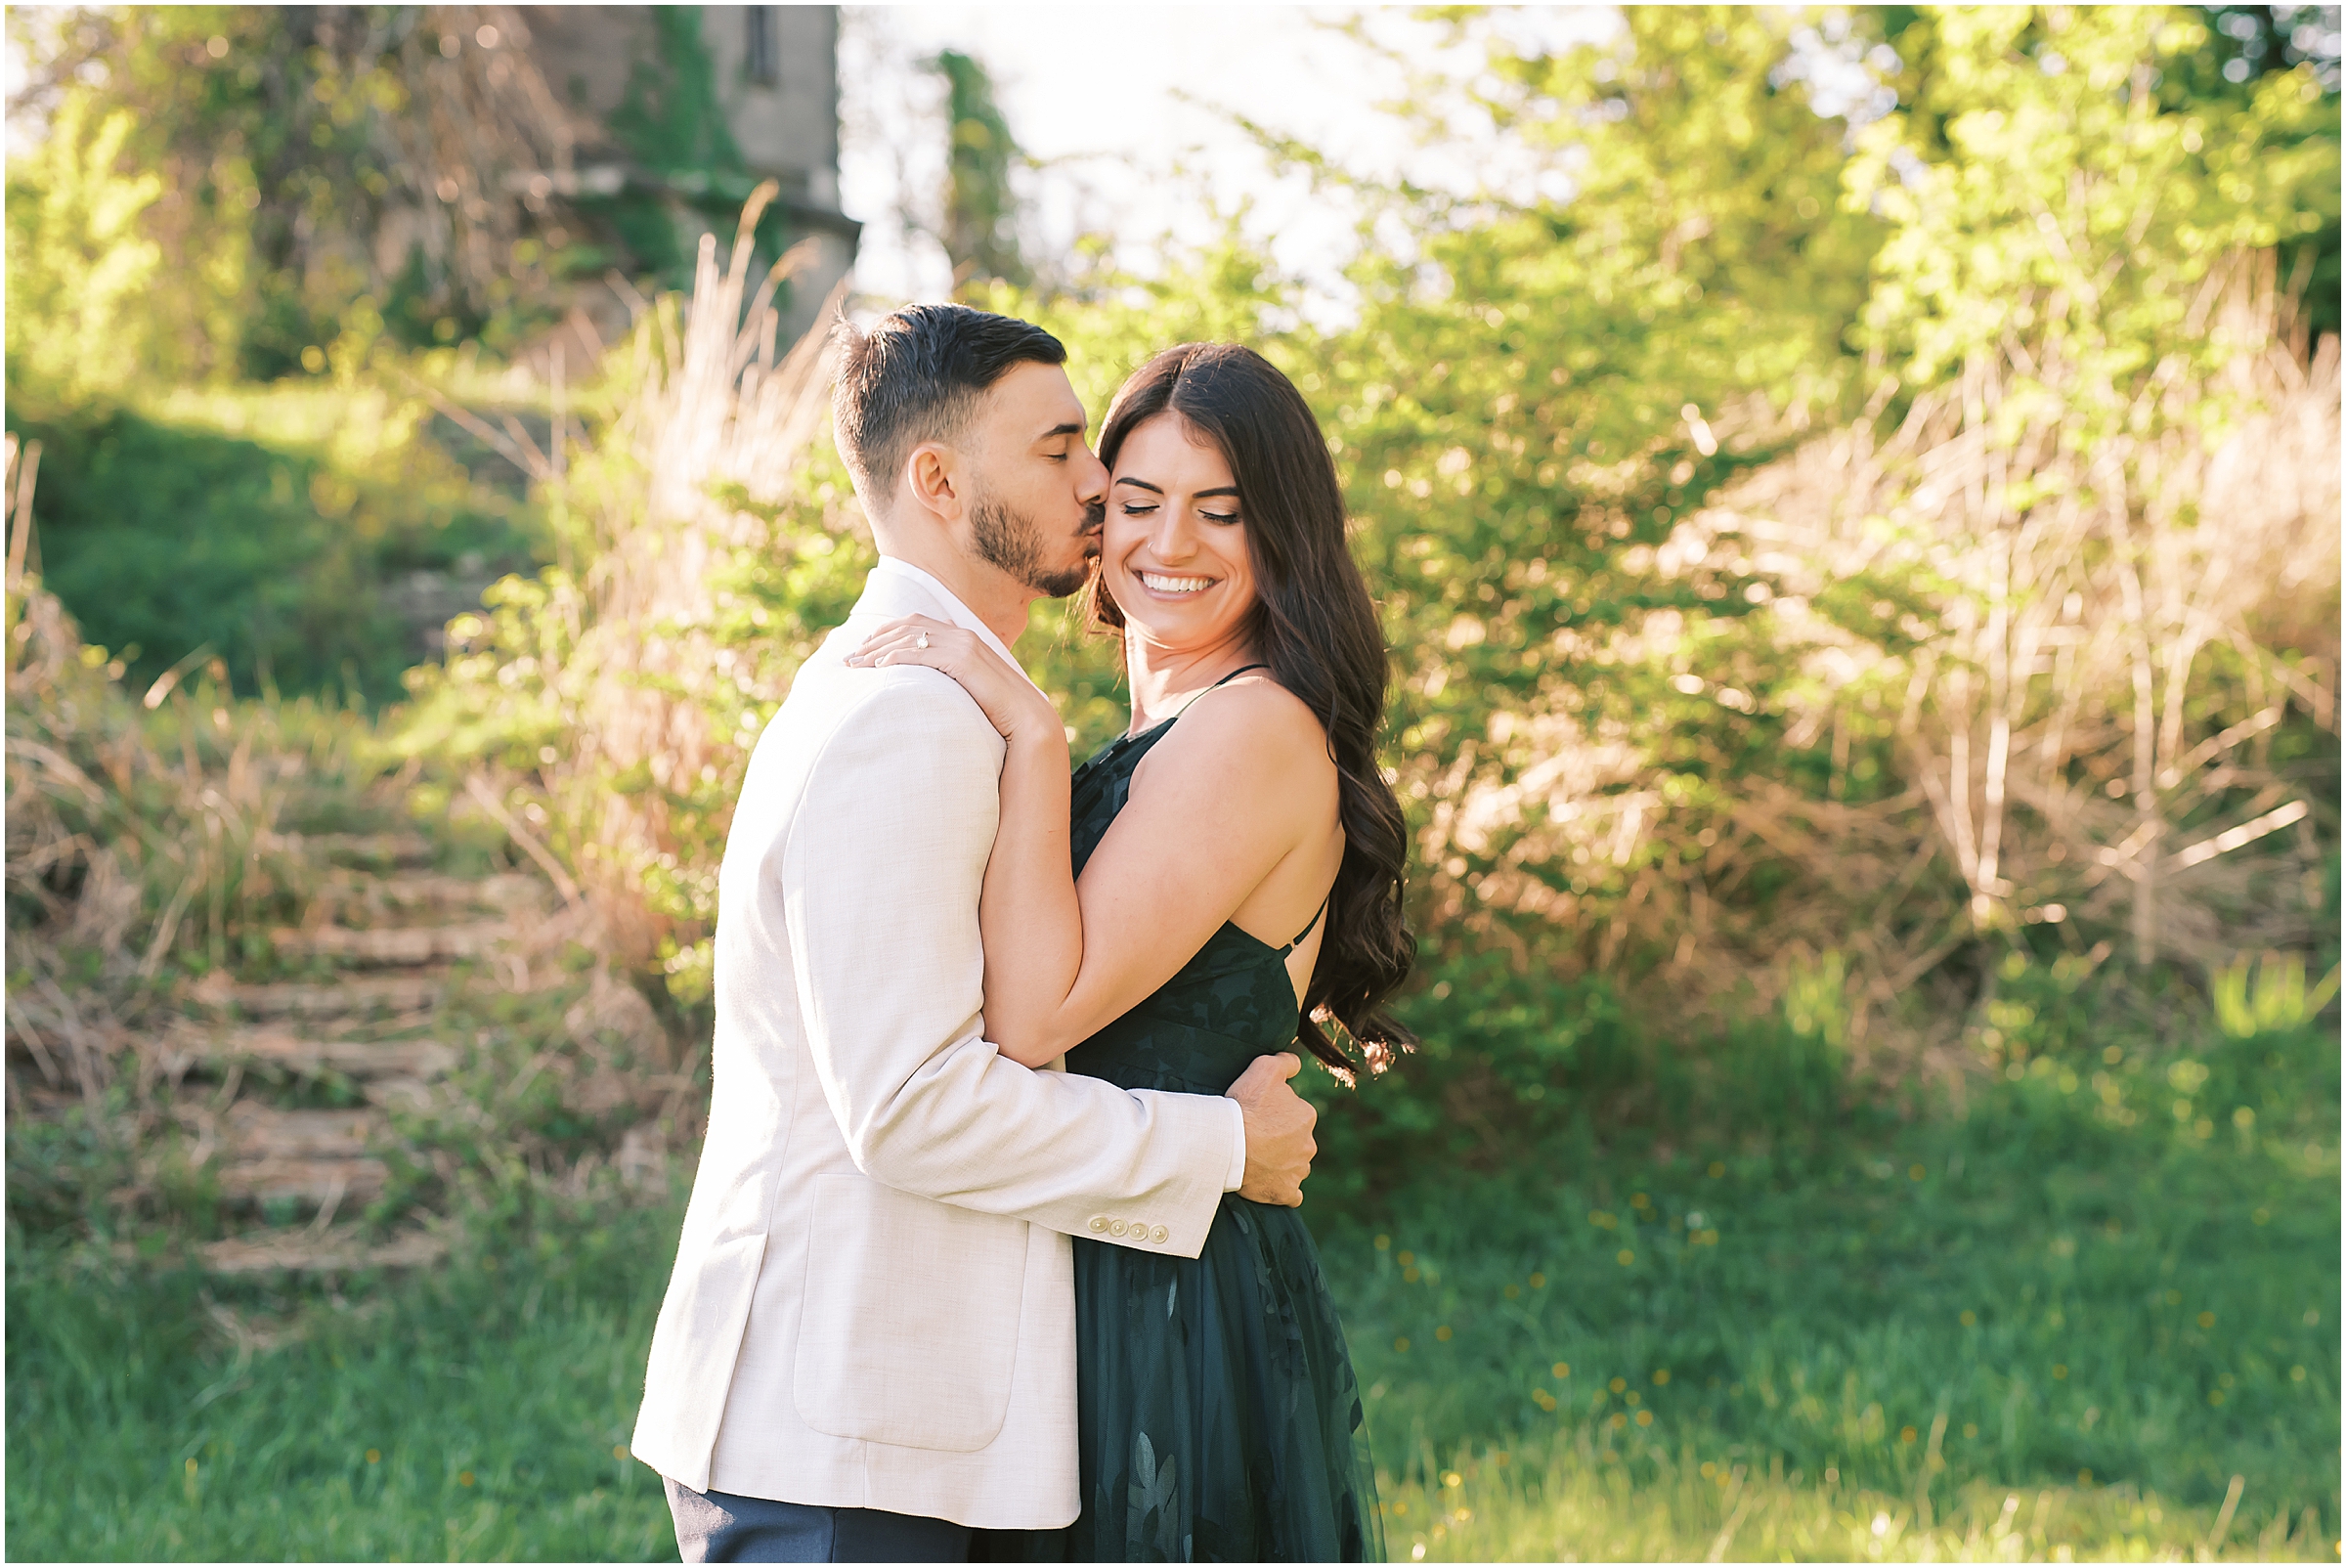 Kiss on the cheek during engagement session